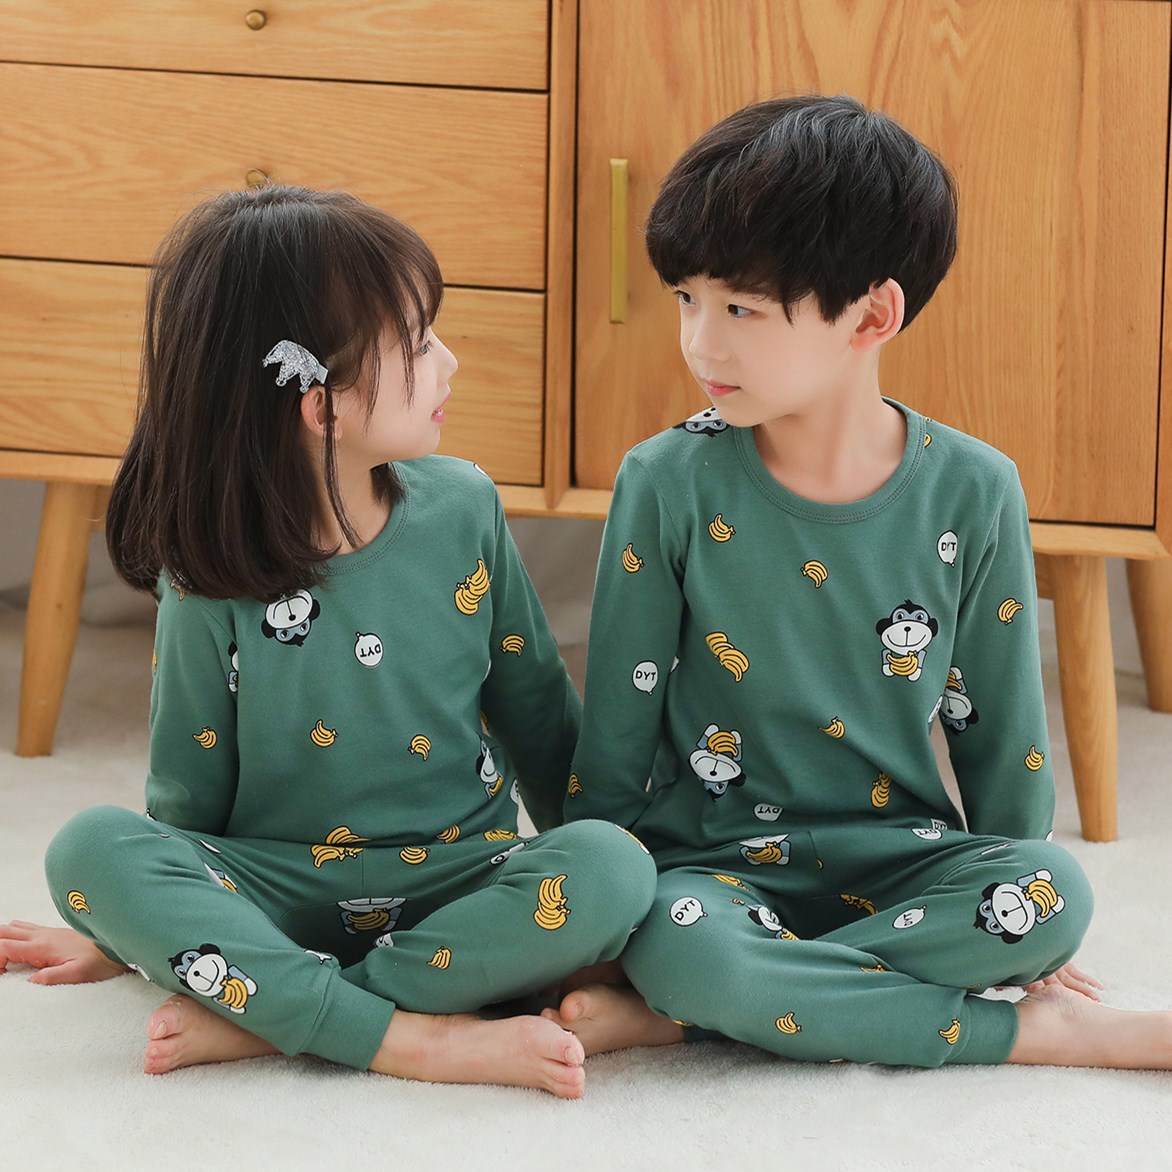 PJ071 IDR.60.000 - 80.000 MATERIAL COTTON SIZE 100,110,120,130,140,150,160 WEIGHT 250GR COLOR GREENMONKEY